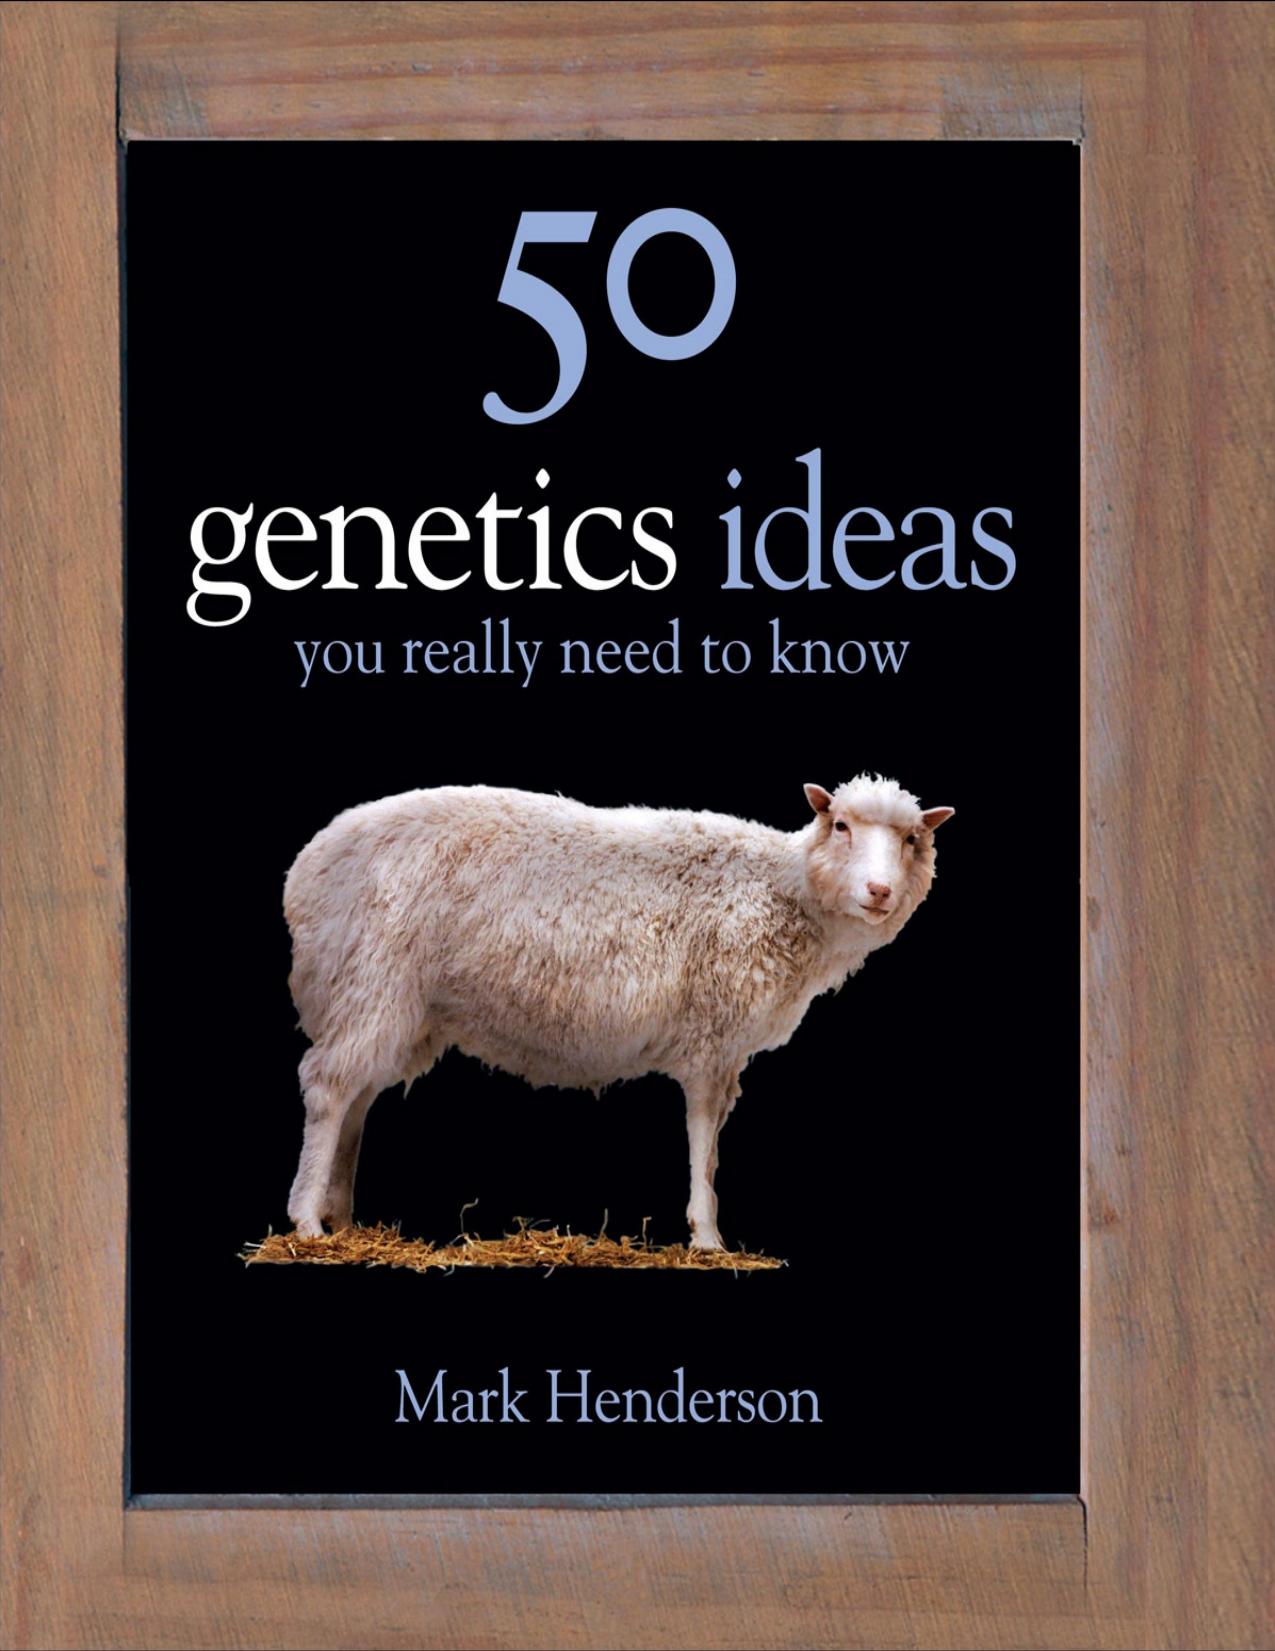 50 Genetics Ideas You Really Need to Know by Mark Henderson